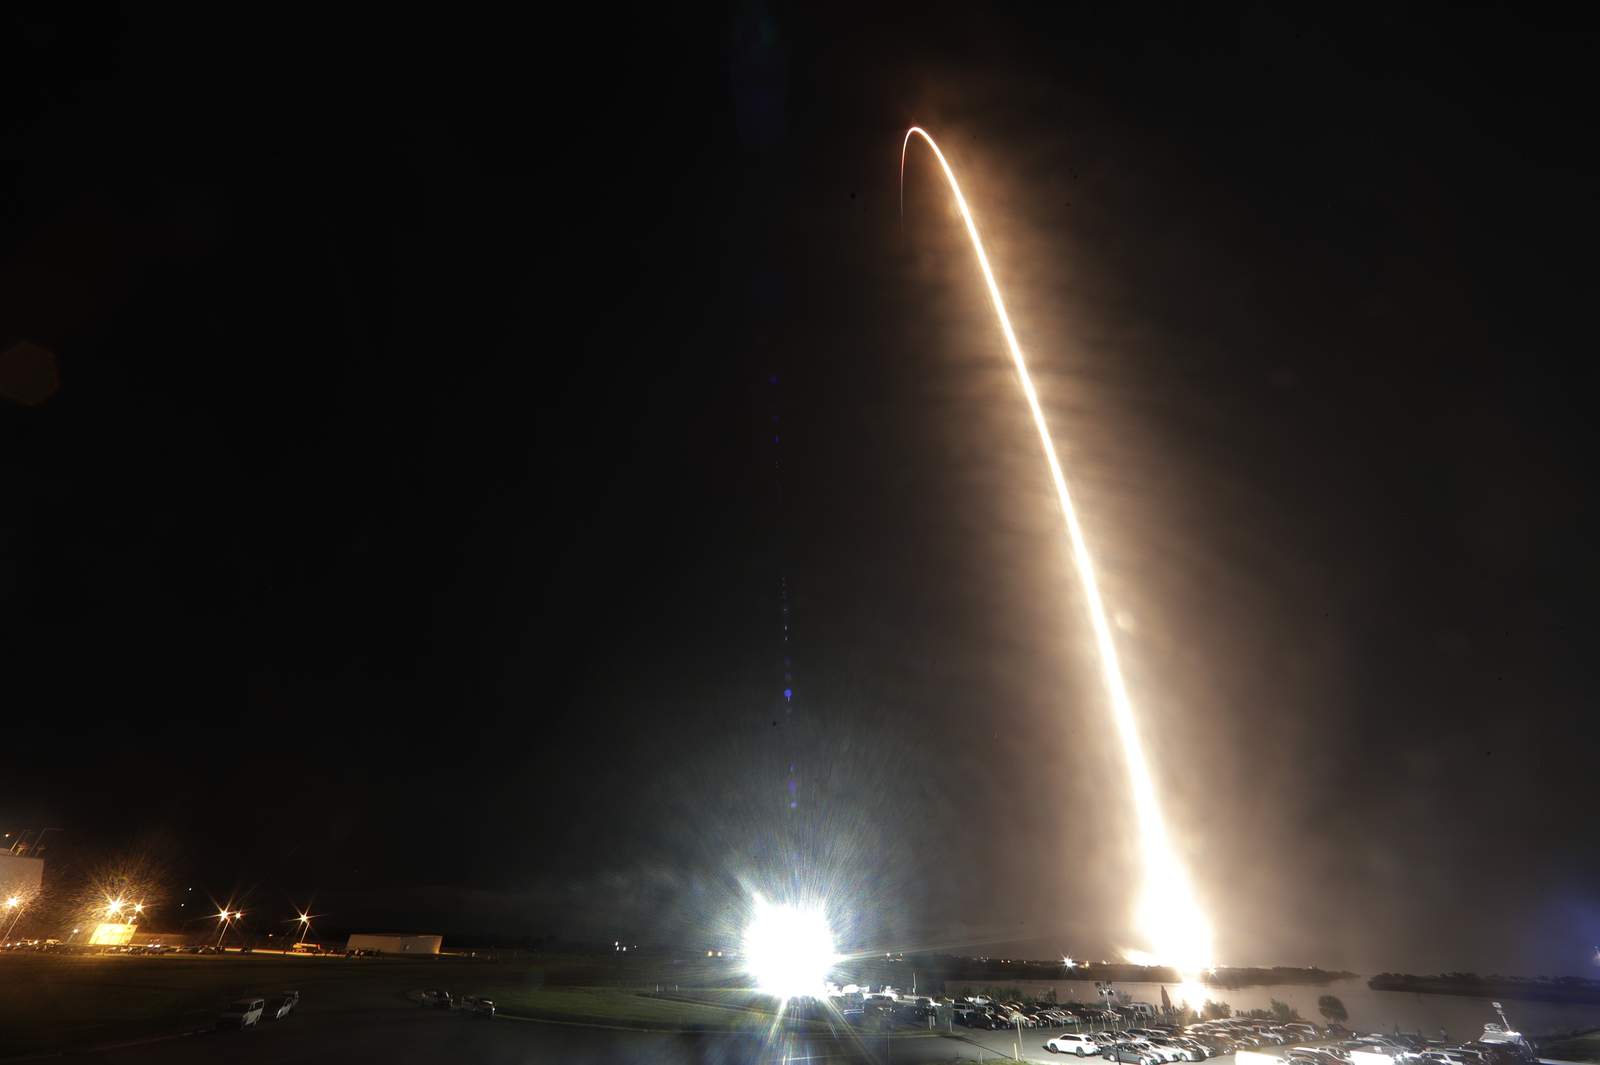 SpaceX aims for night crew launch, Elon Musk sidelined by virus